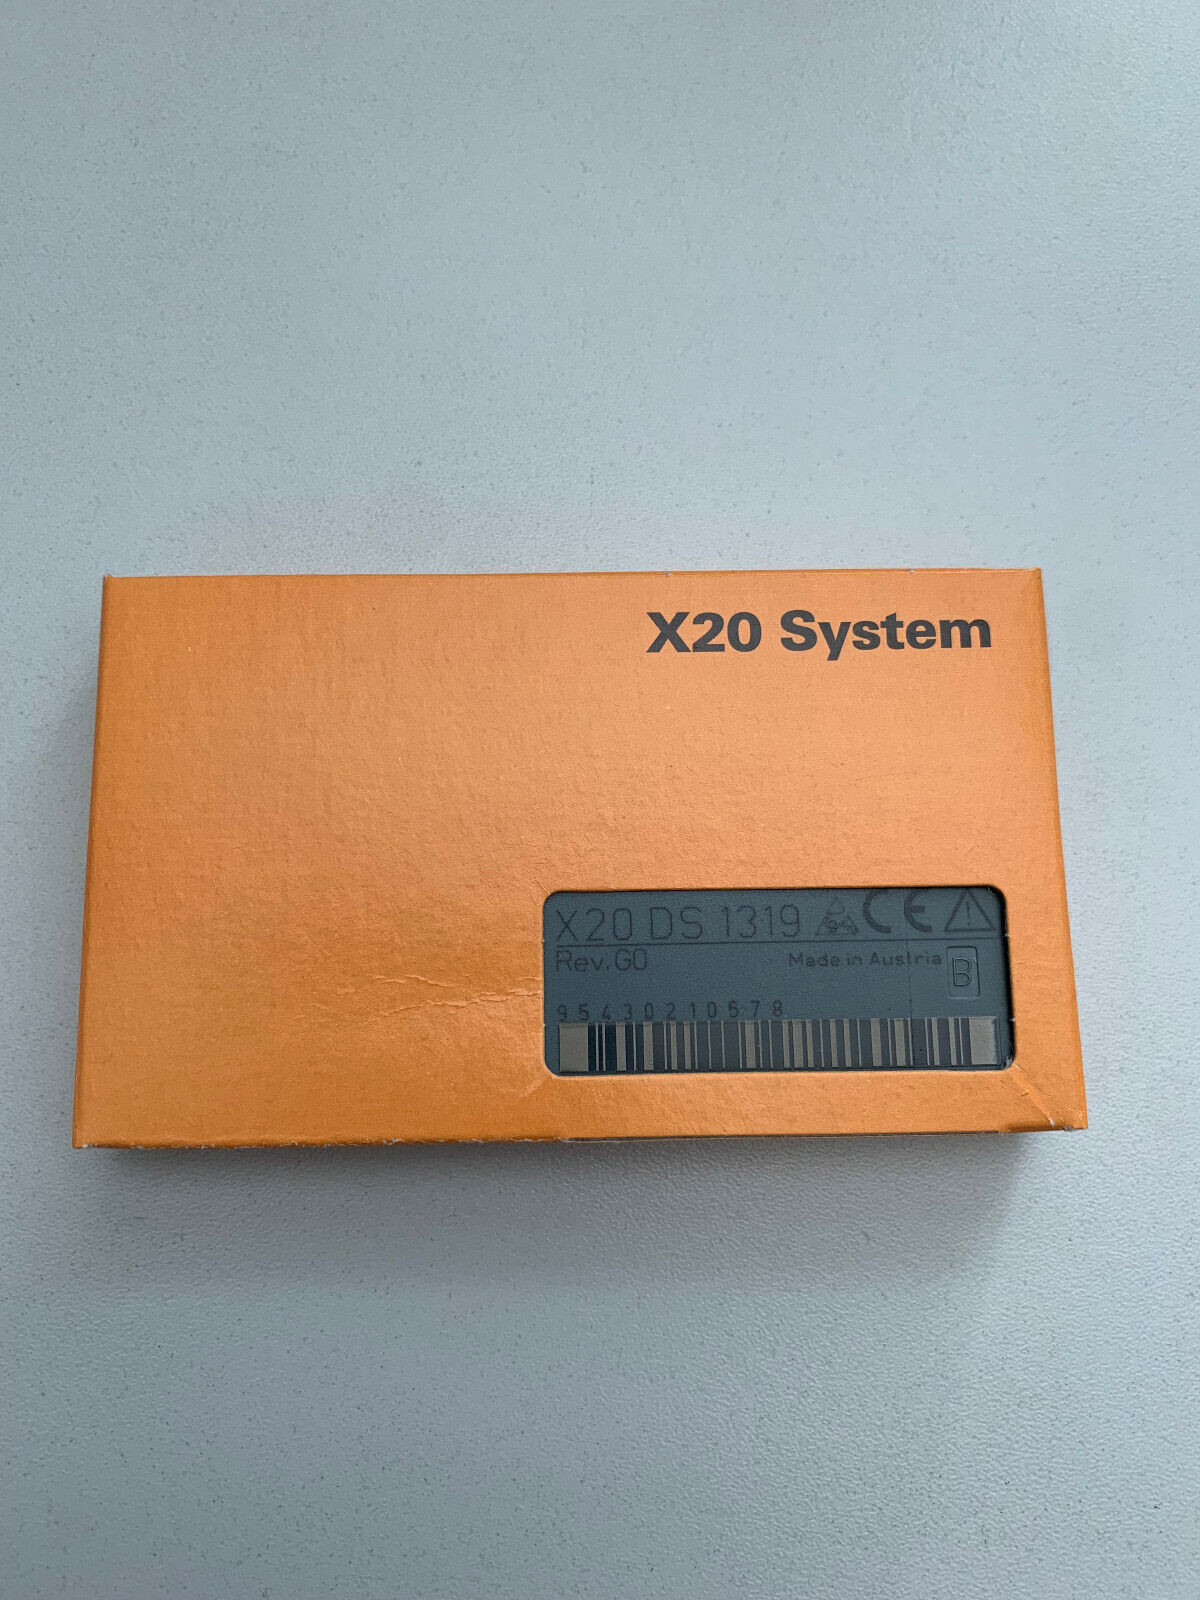 Quality X20DS1319 B&amp;R X20 PLC SYSTEM 4 Digital Input Channels Configurable As Inputs Or Outputs for sale